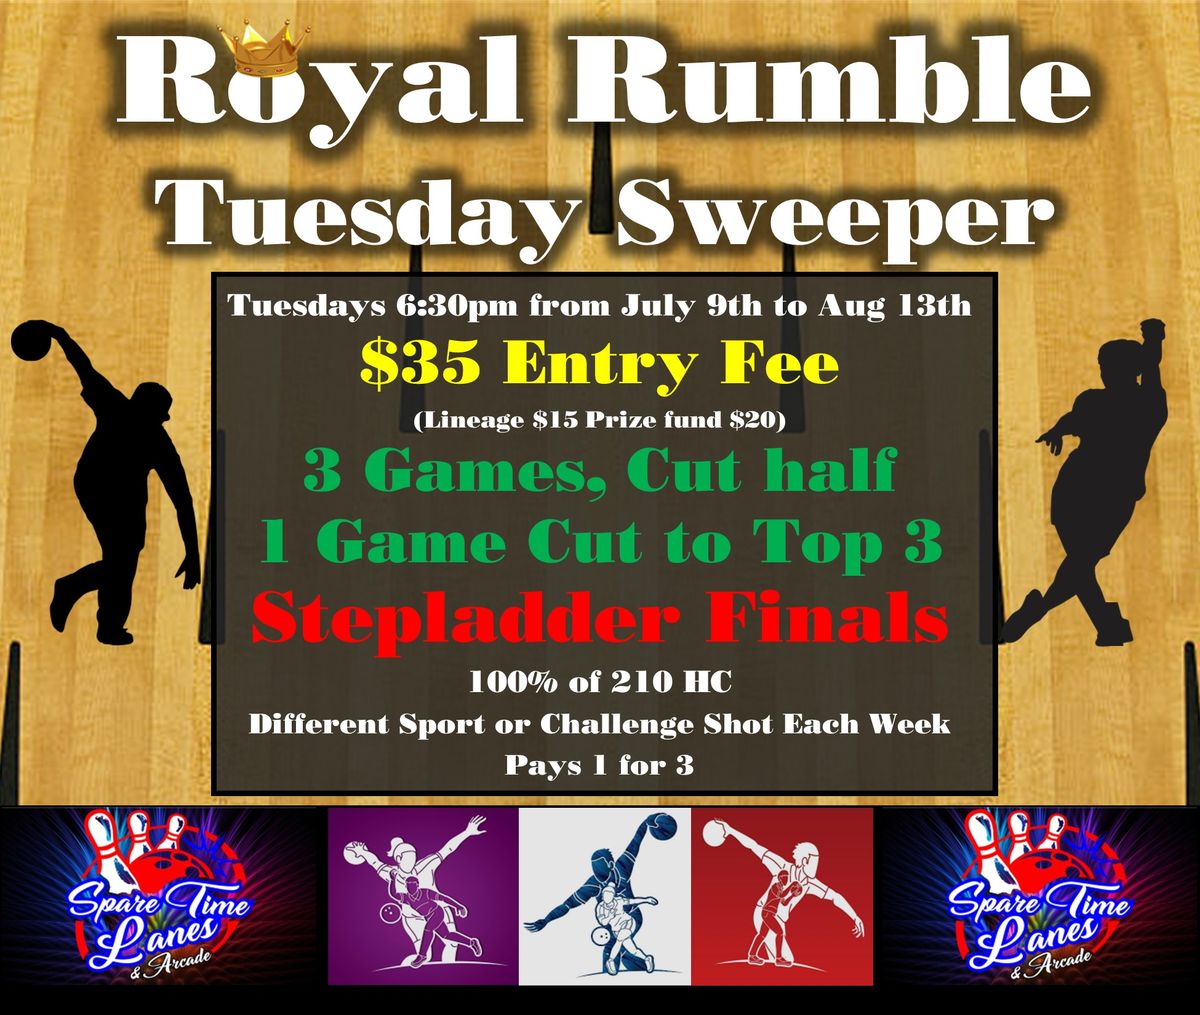 Royal Rumble Tuesday Sweeper!